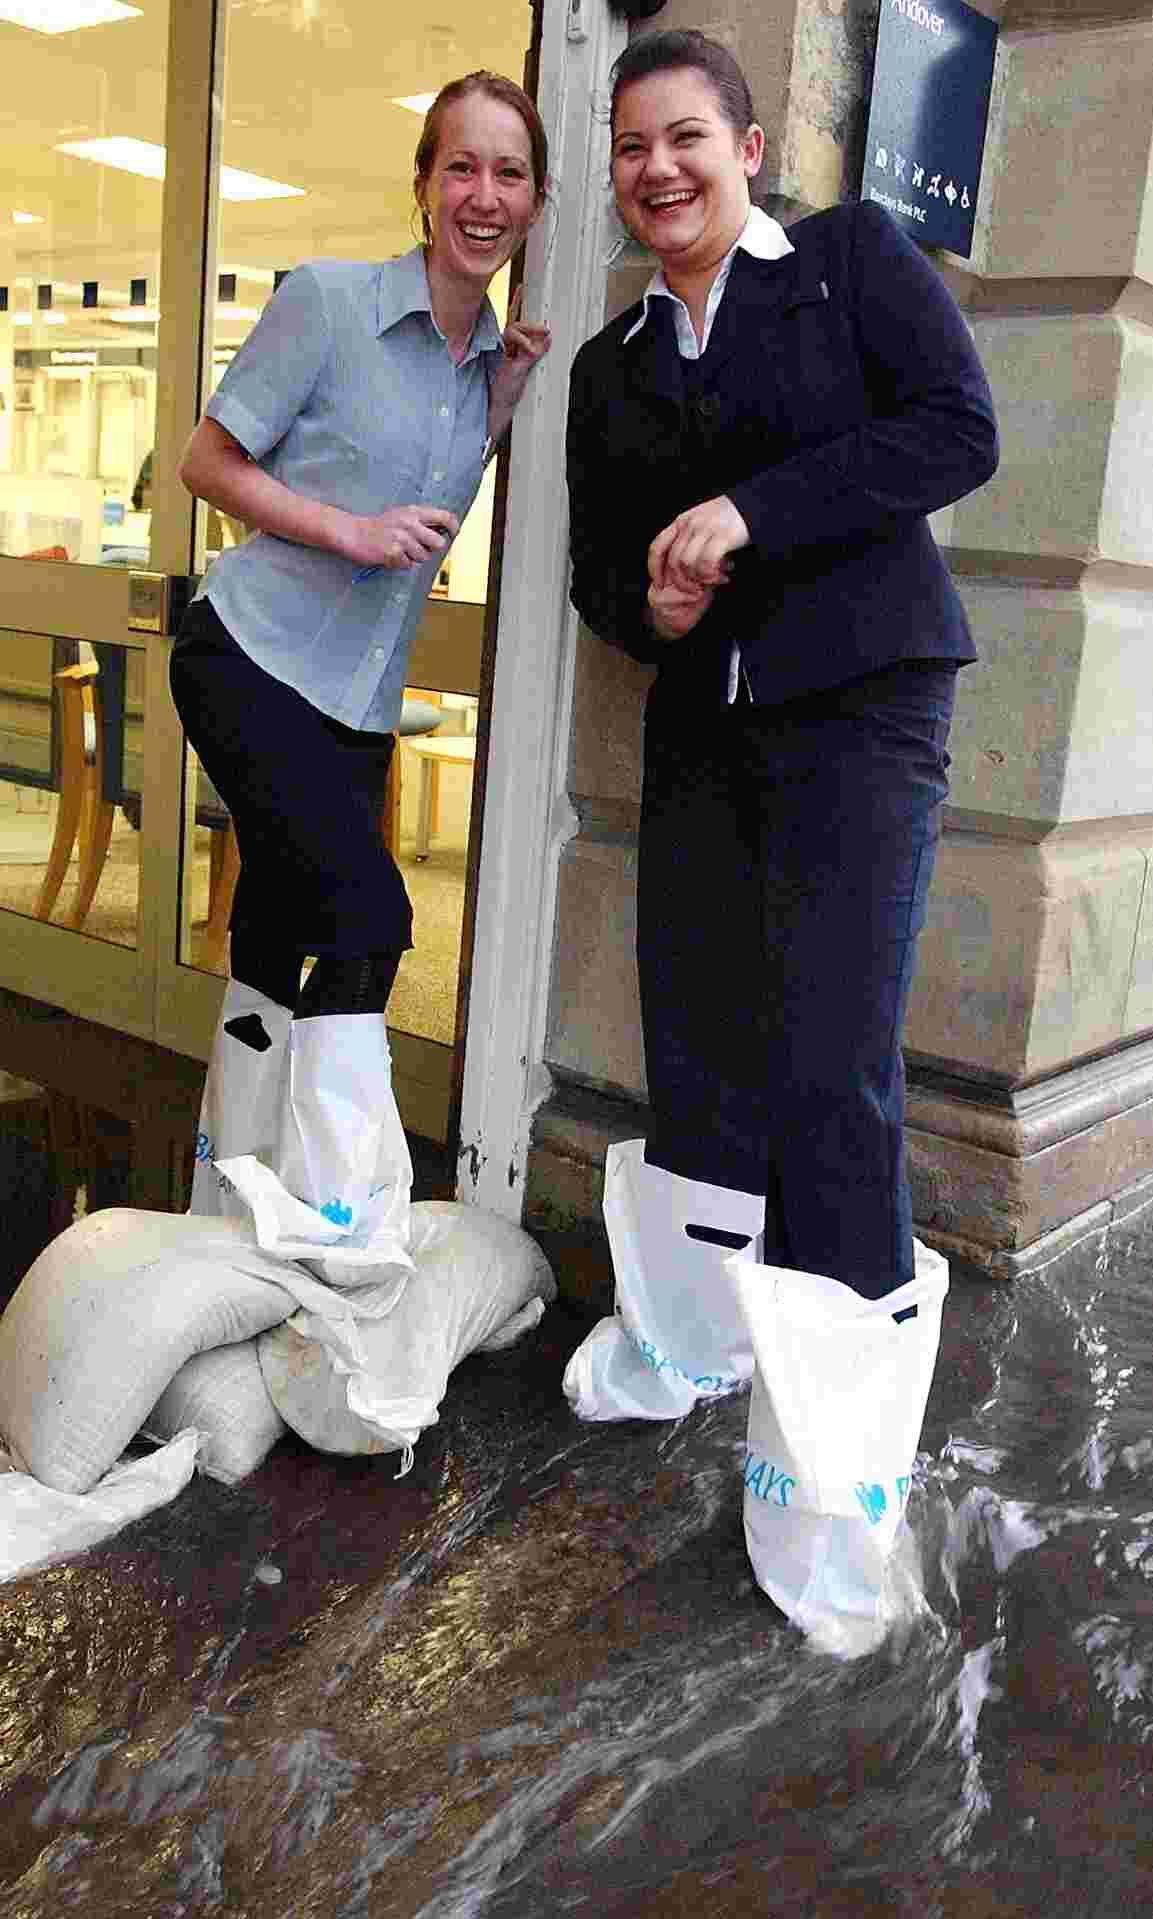 Andover High Street's Barclays Bank employees Rebecca Greenway and Emily Tattershall wearing barclays bank bags on their feet due to flooding in the entrance lobby. in 2007